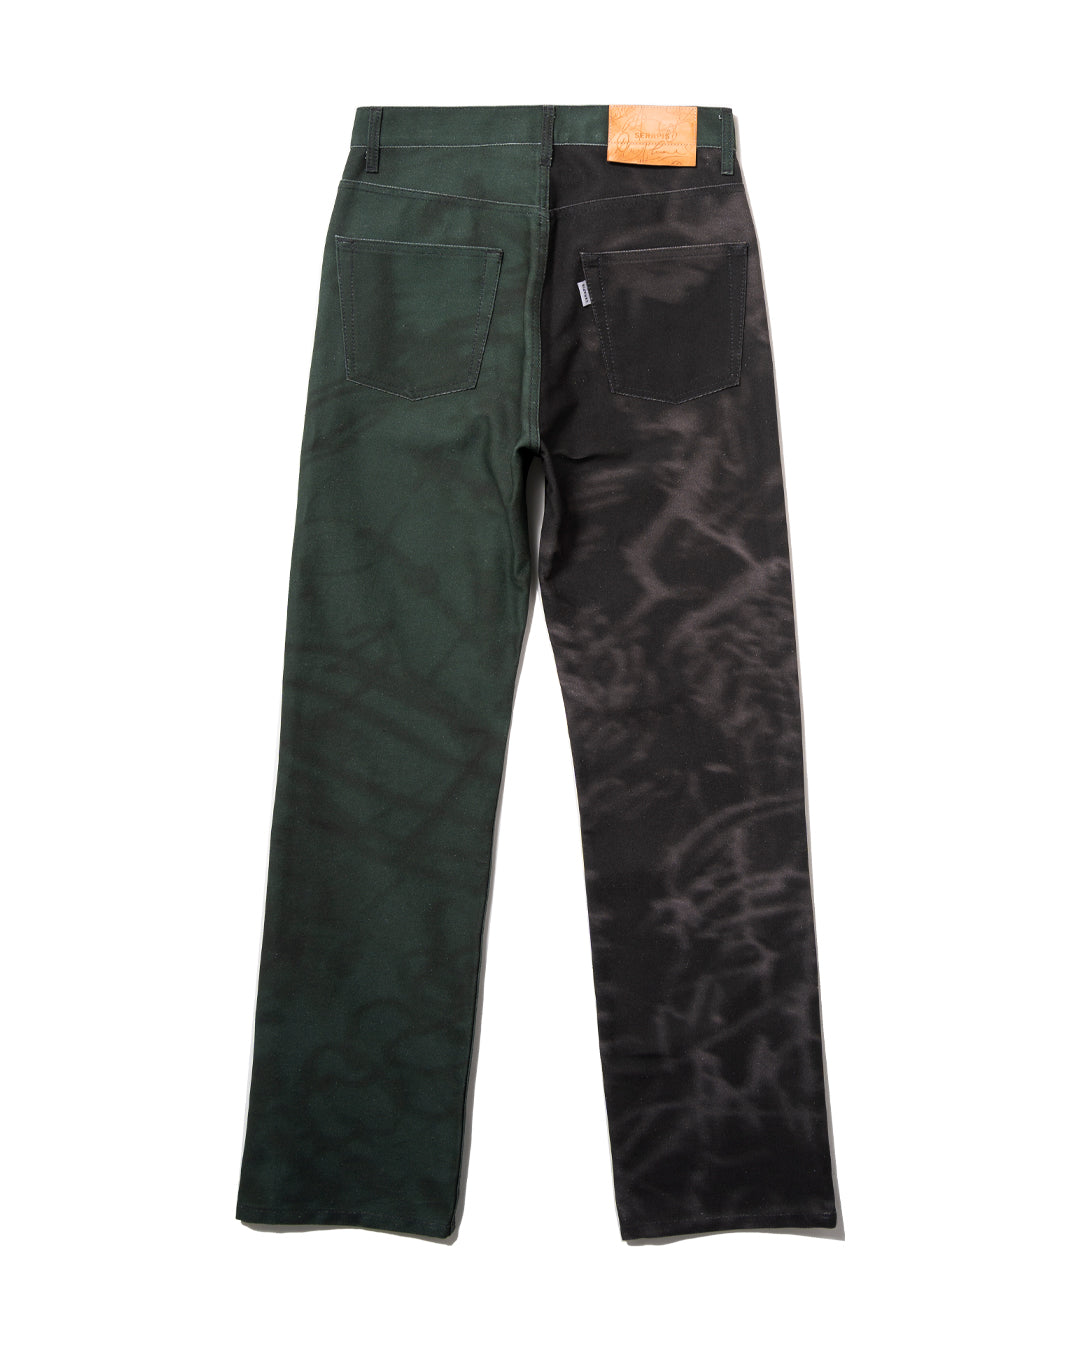 GREEN AND BLACK SPLIT DRAWINGS JEANS